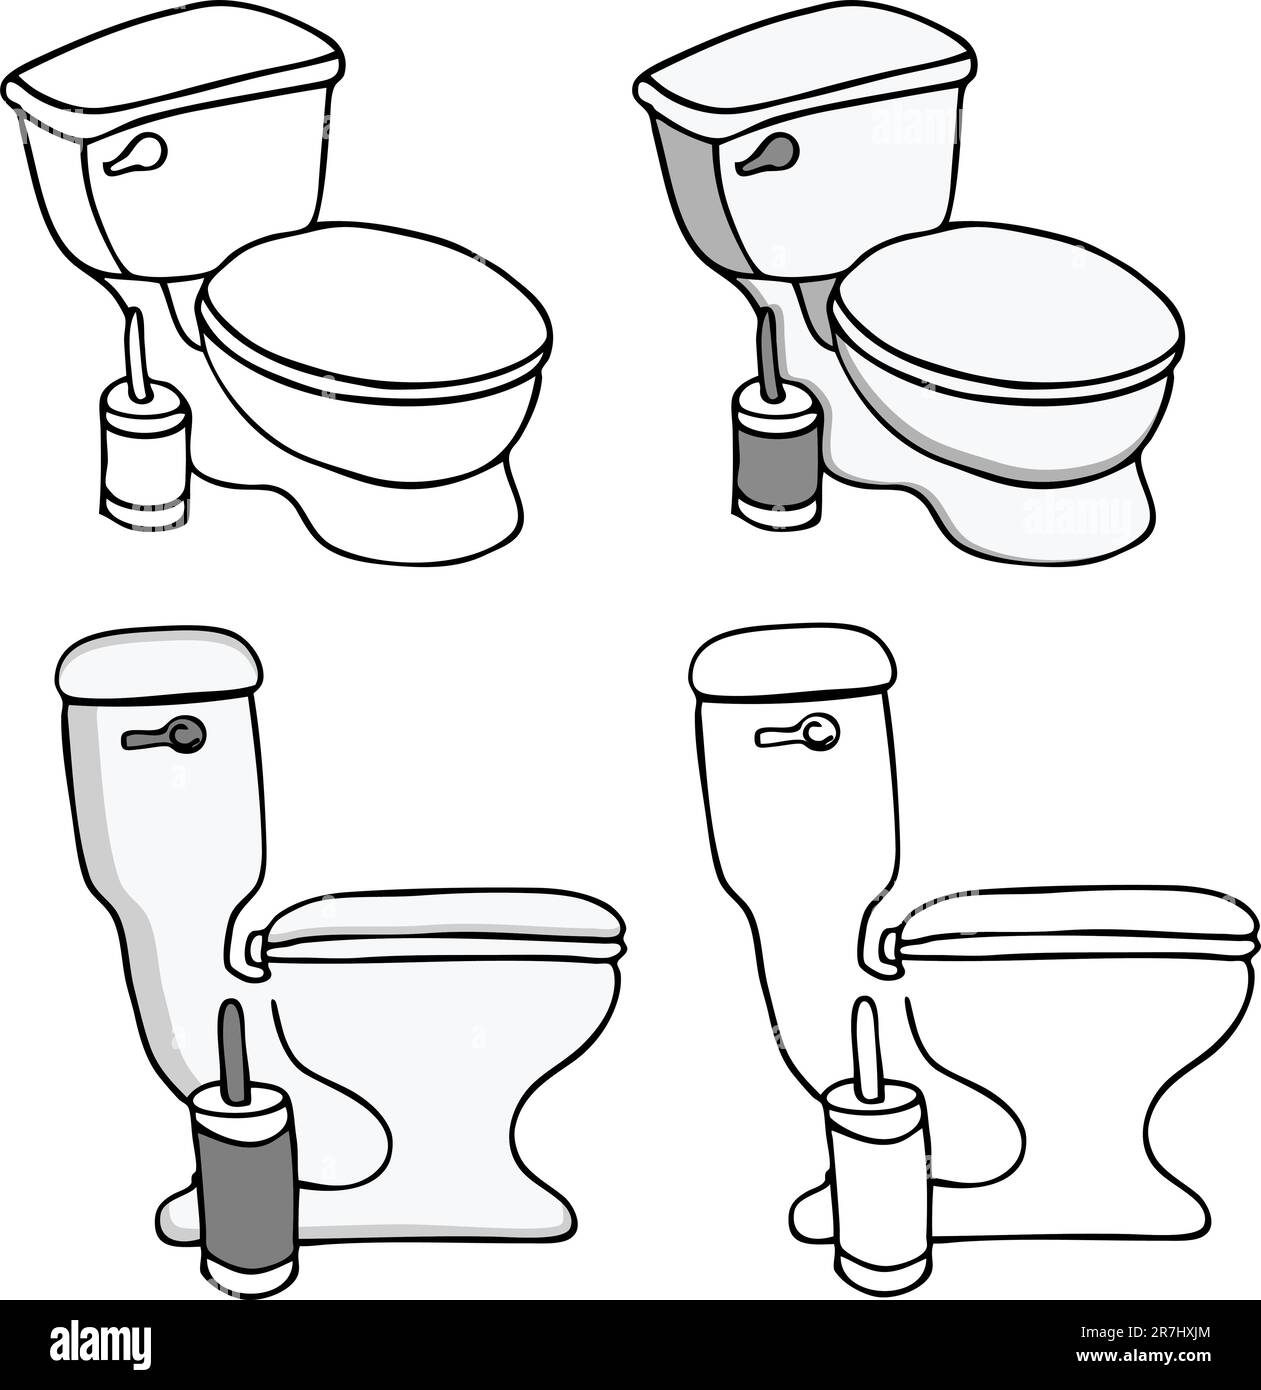 An image of a set of bathroom toilet commodes. Stock Vector